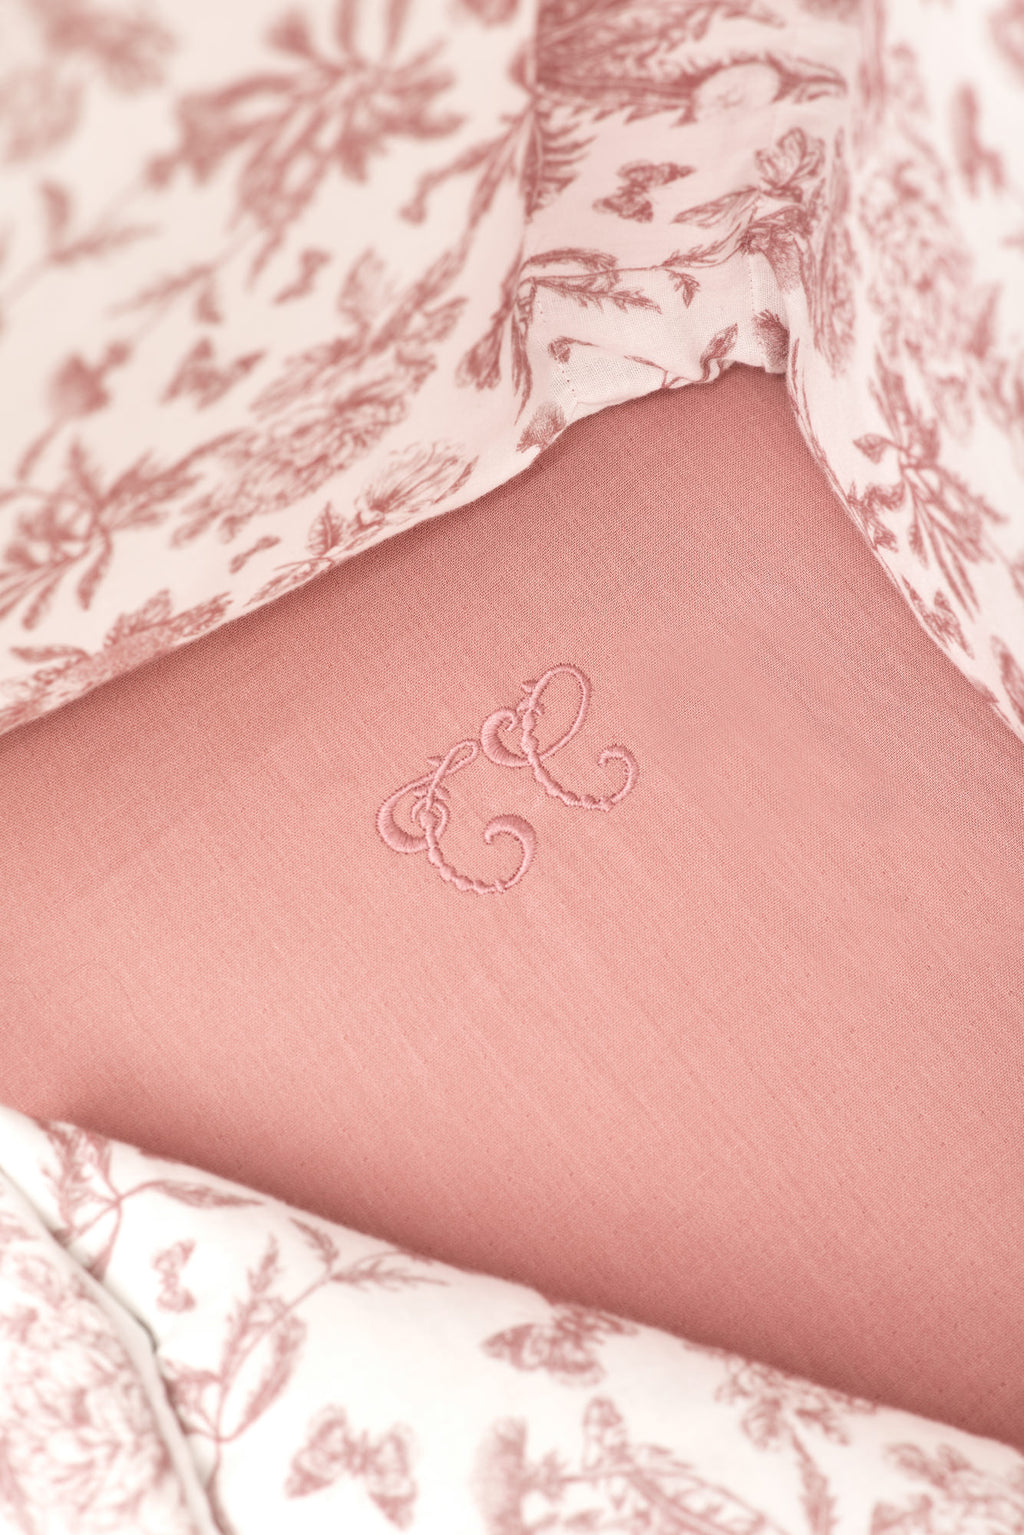 Fitted sheet - Print inspiration Toile de Jouy Pink